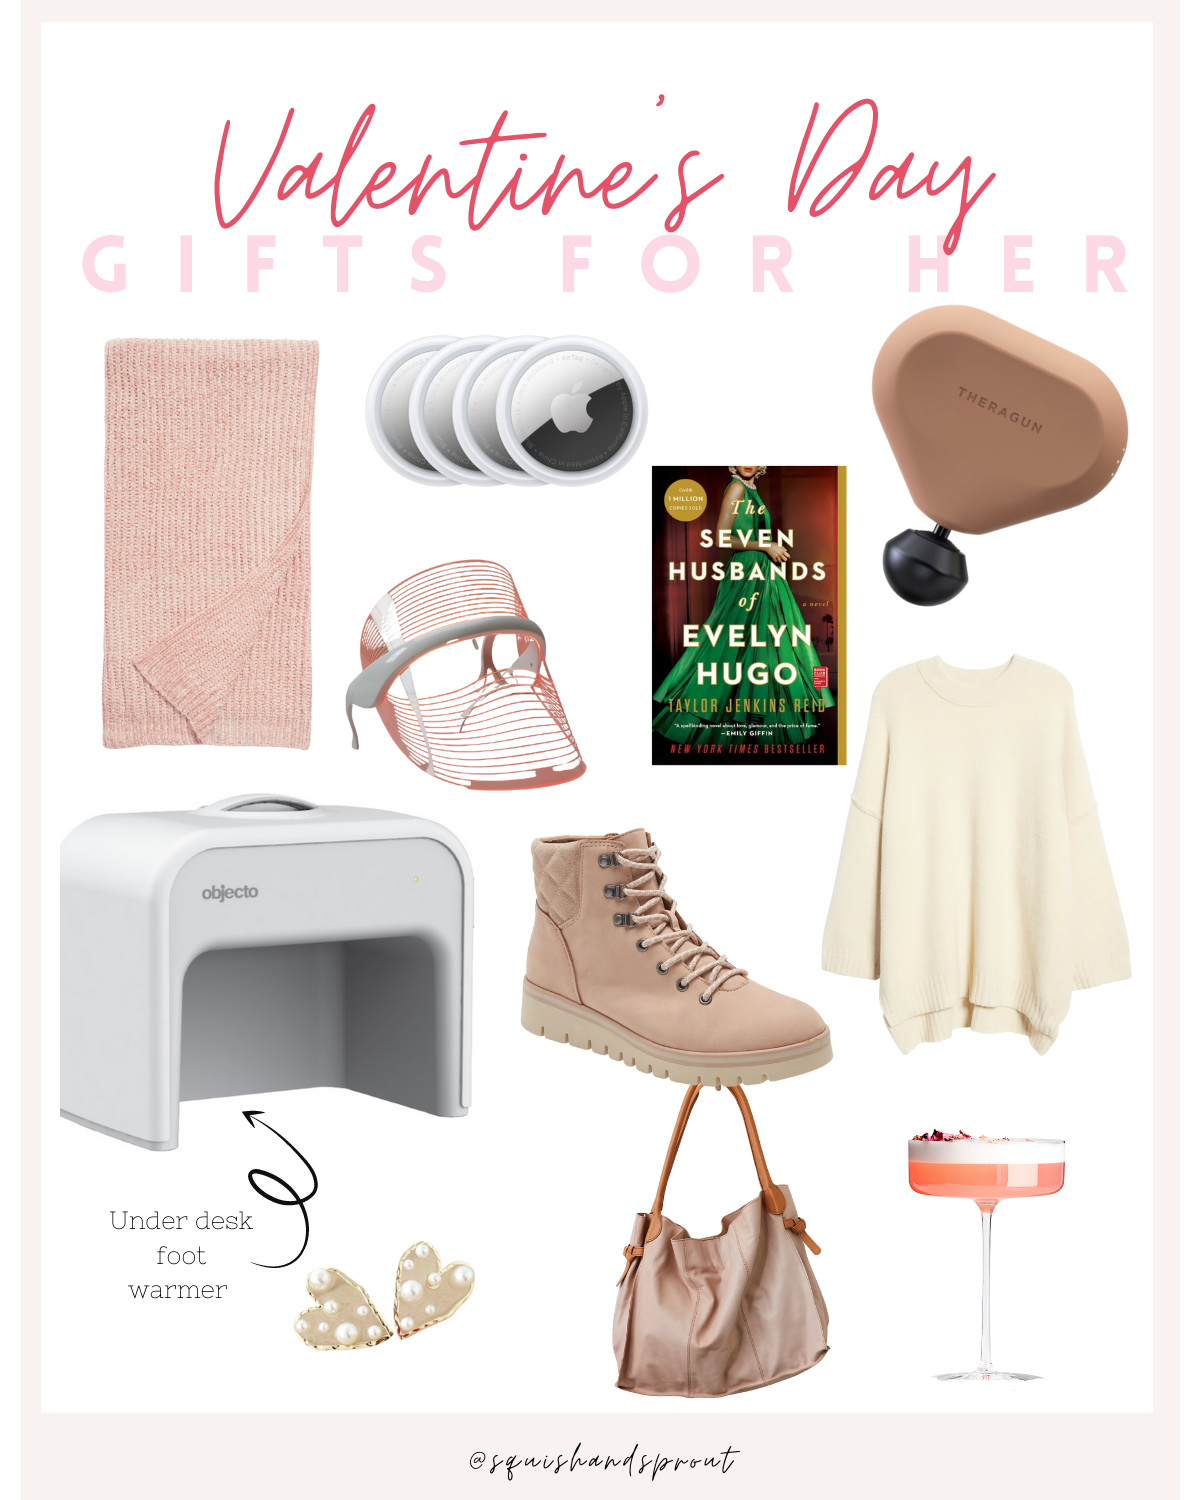 Valentine’s Day Gift Guide for HER